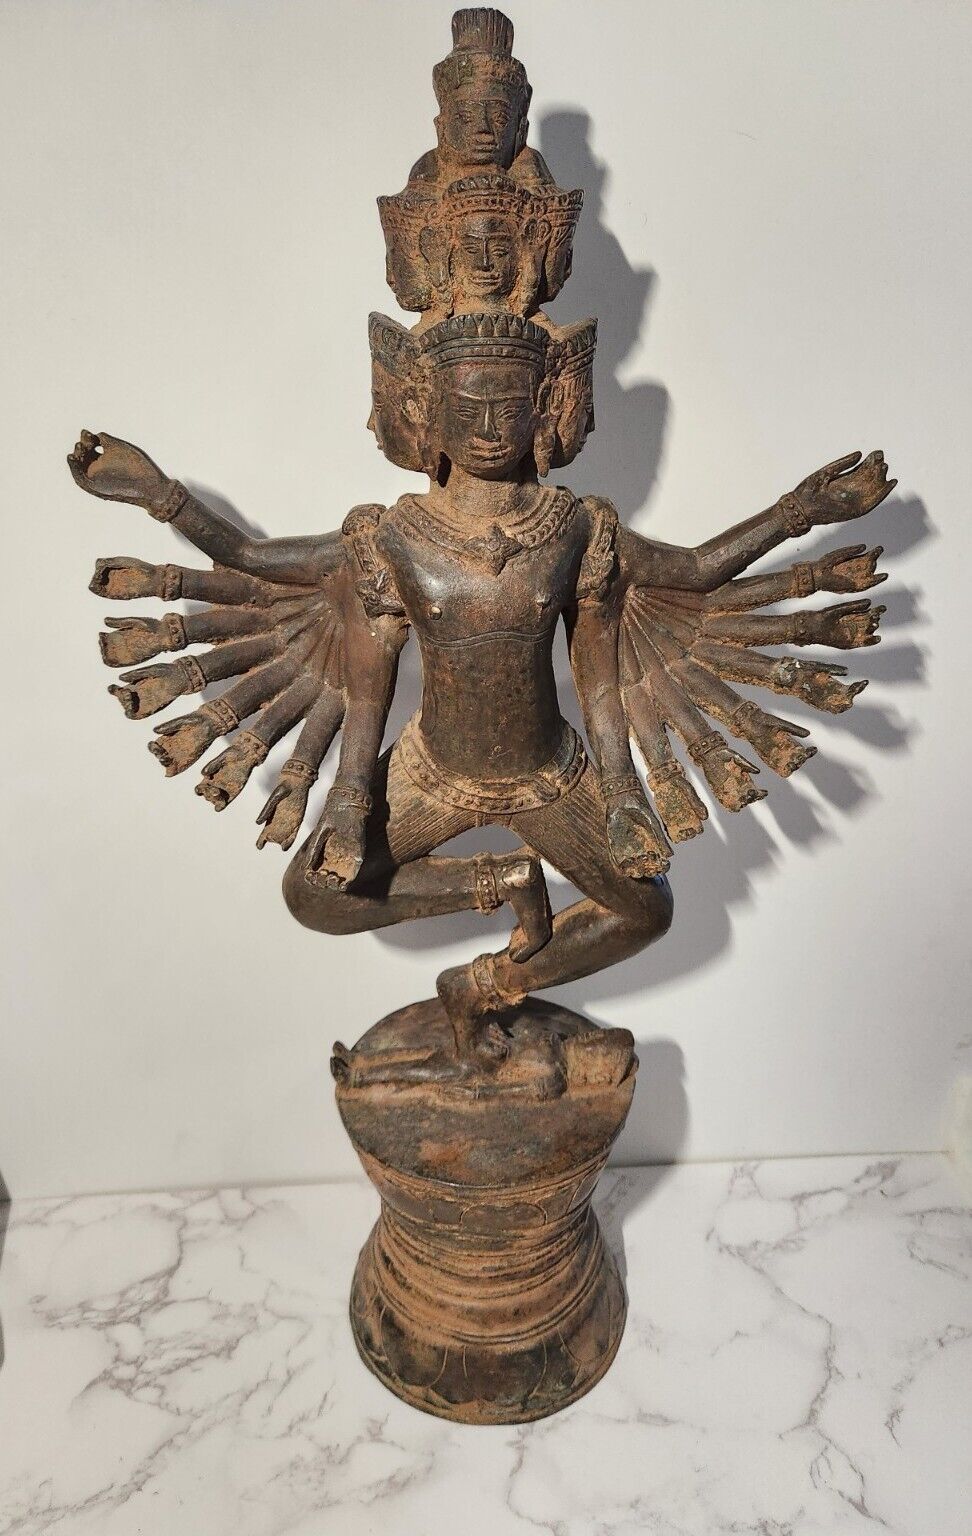 Thai Brass Dancing Hevajra Statue With 16 Arms And 8 Faces On Drum Shaped Base